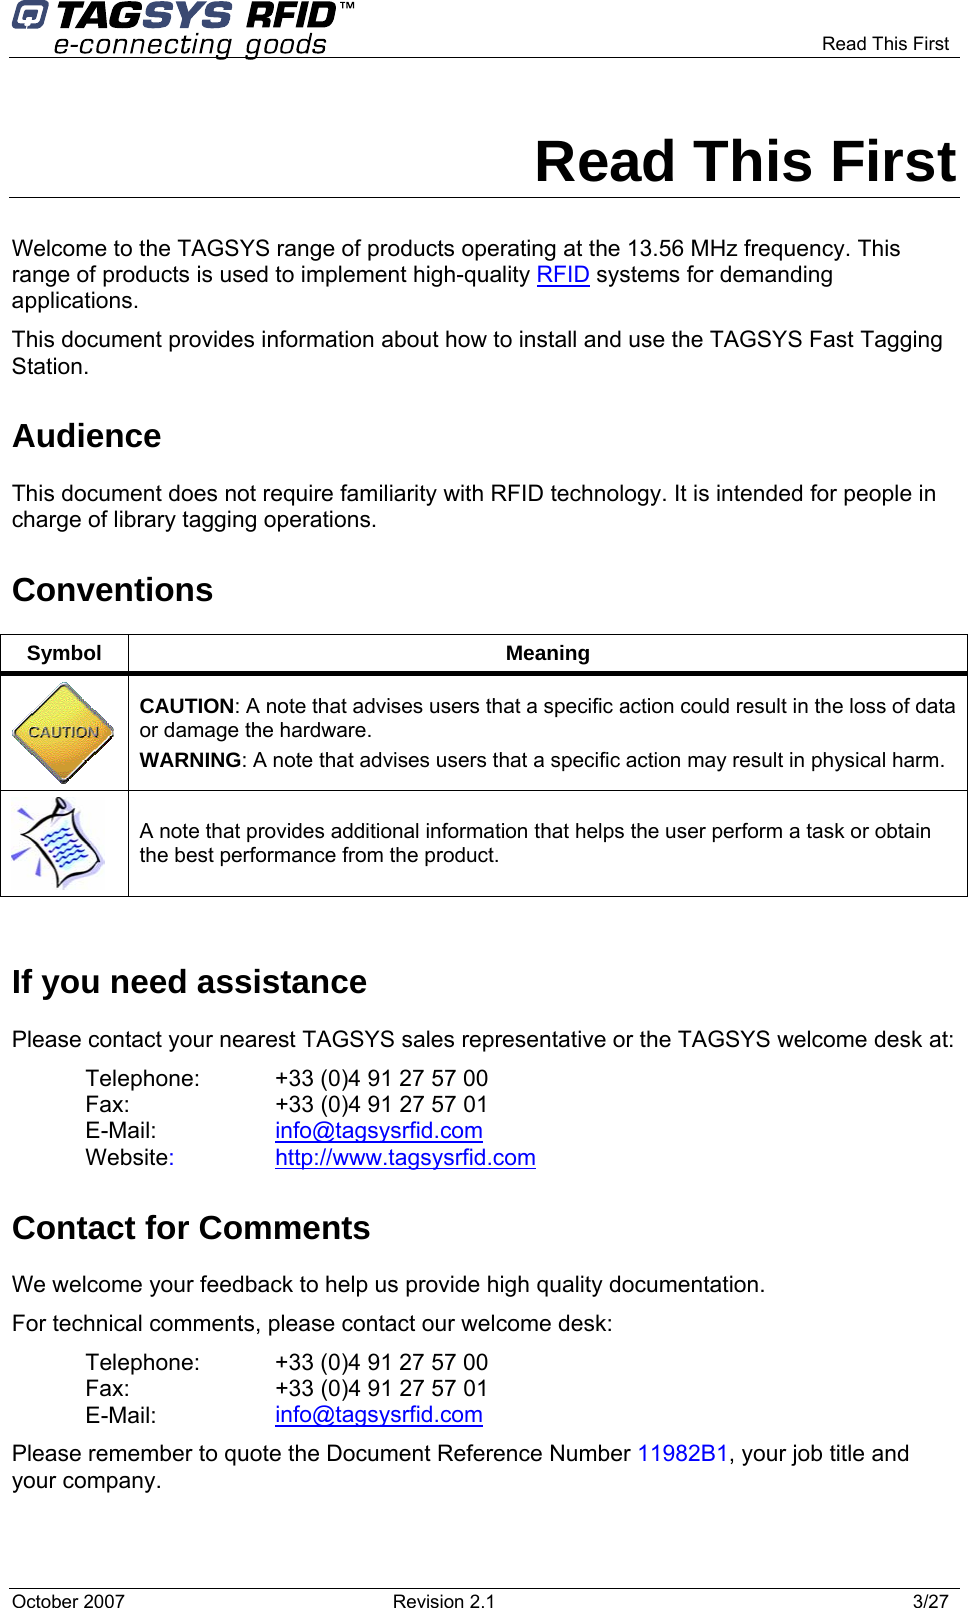      Read This First  Read This First Welcome to the TAGSYS range of products operating at the 13.56 MHz frequency. This range of products is used to implement high-quality RFID systems for demanding applications. This document provides information about how to install and use the TAGSYS Fast Tagging Station. Audience This document does not require familiarity with RFID technology. It is intended for people in charge of library tagging operations. Conventions Symbol Meaning  CAUTION: A note that advises users that a specific action could result in the loss of data or damage the hardware. WARNING: A note that advises users that a specific action may result in physical harm.   A note that provides additional information that helps the user perform a task or obtain the best performance from the product.  If you need assistance Please contact your nearest TAGSYS sales representative or the TAGSYS welcome desk at: Telephone:  +33 (0)4 91 27 57 00  Fax:  +33 (0)4 91 27 57 01 E-Mail:  info@tagsysrfid.com Website:  http://www.tagsysrfid.com Contact for Comments We welcome your feedback to help us provide high quality documentation.  For technical comments, please contact our welcome desk: Telephone:  +33 (0)4 91 27 57 00  Fax:  +33 (0)4 91 27 57 01 E-Mail:  info@tagsysrfid.com Please remember to quote the Document Reference Number 11982B1, your job title and your company. October 2007  Revision 2.1  3/27 